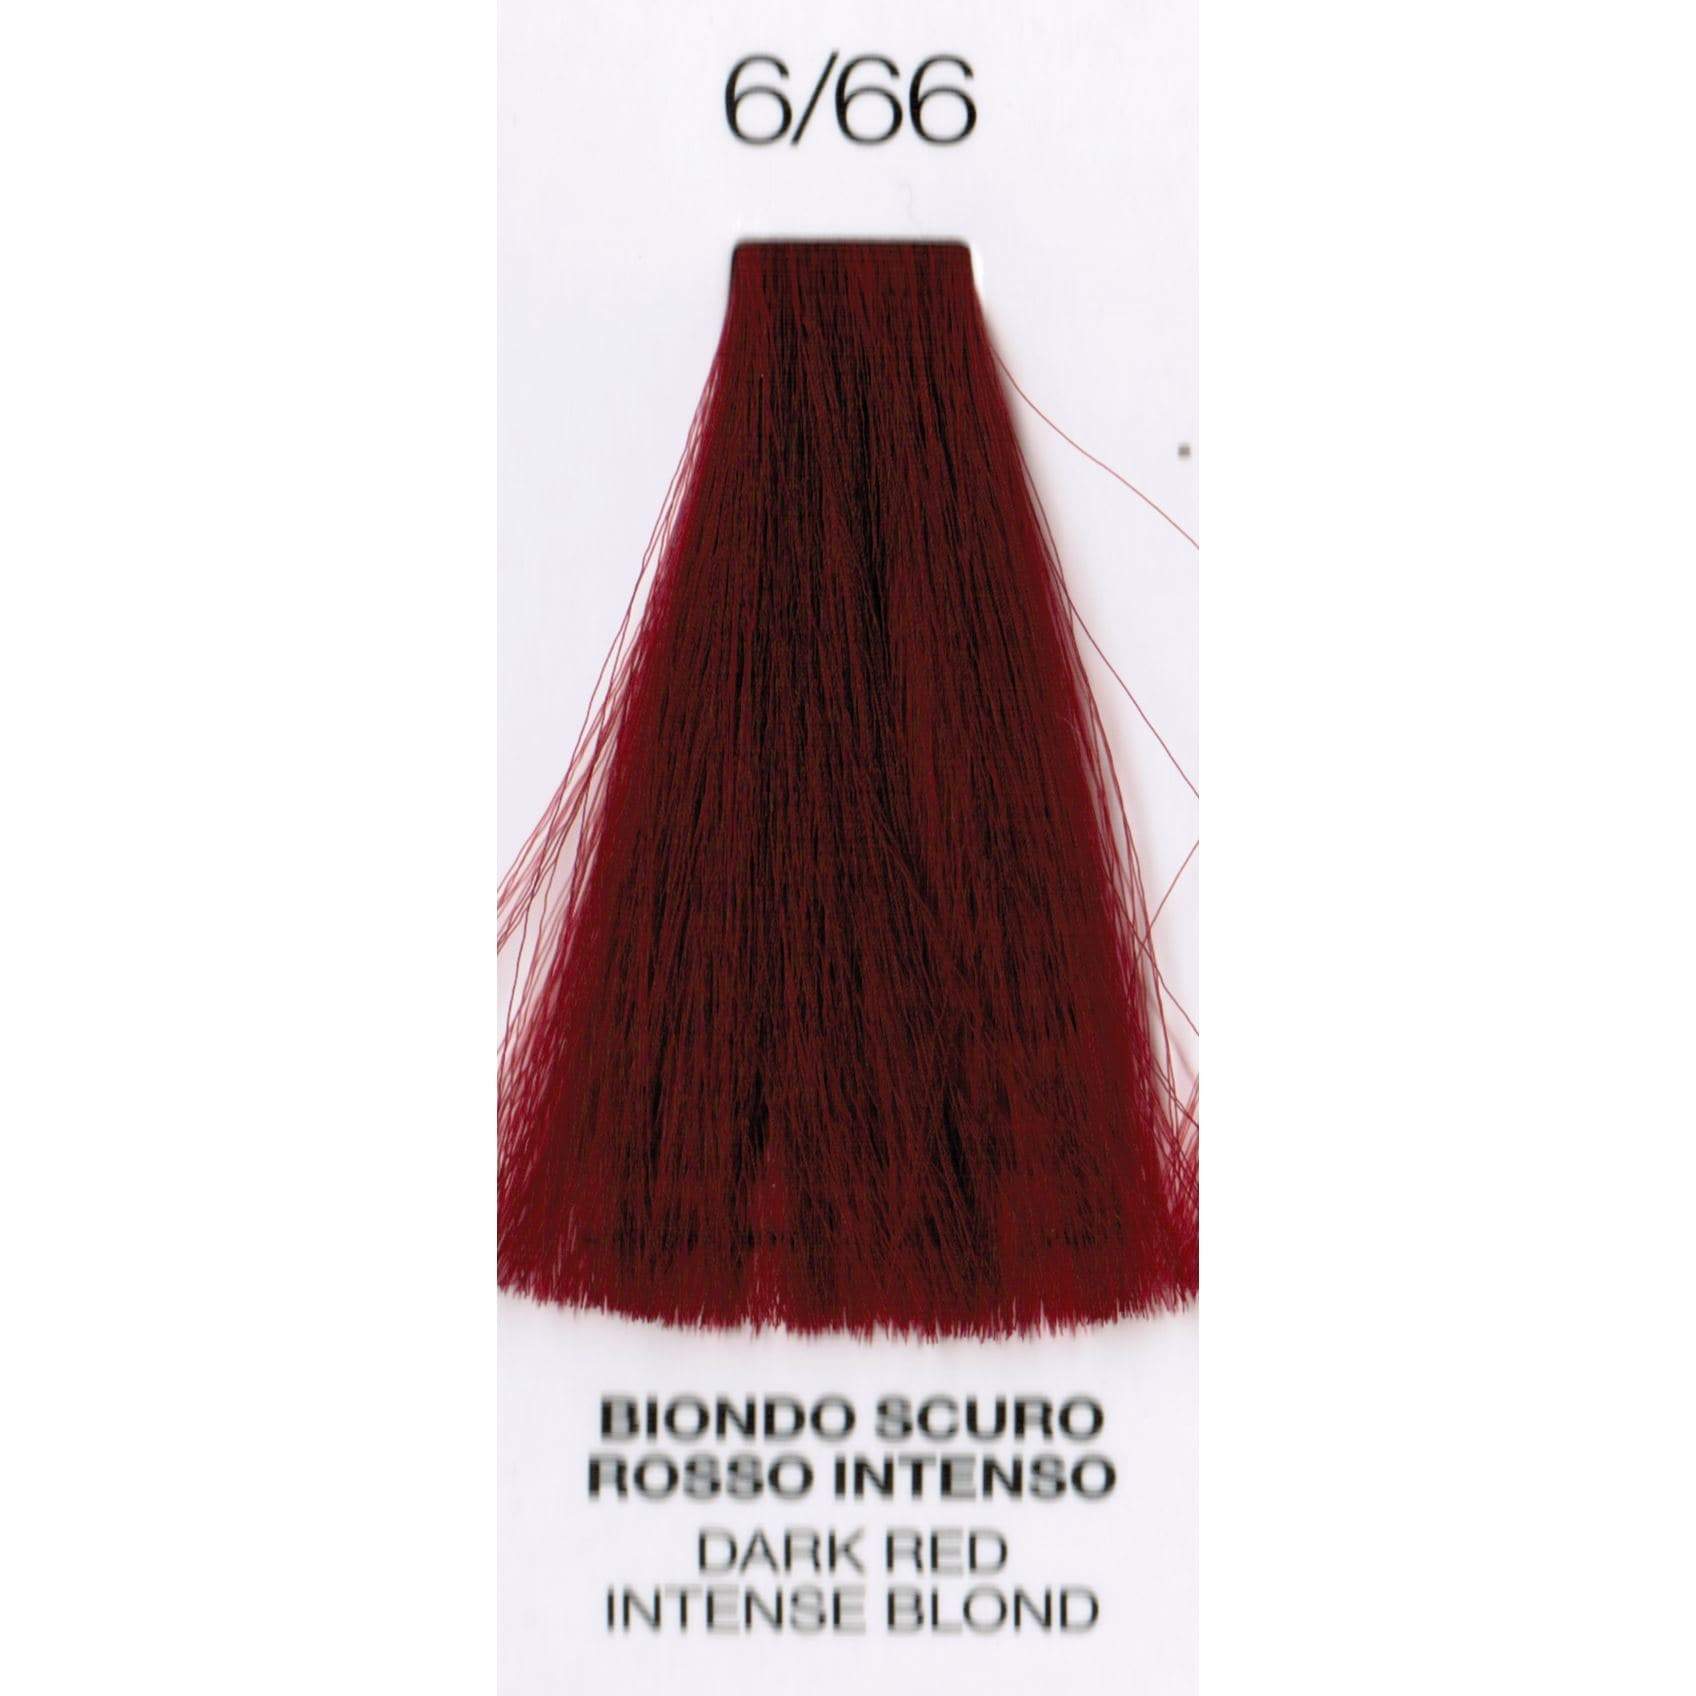 6/66 Dark Red Blonde Intense | Ammonia-Free Permanent Hair Color | Purity | OYSTER - SH Salons